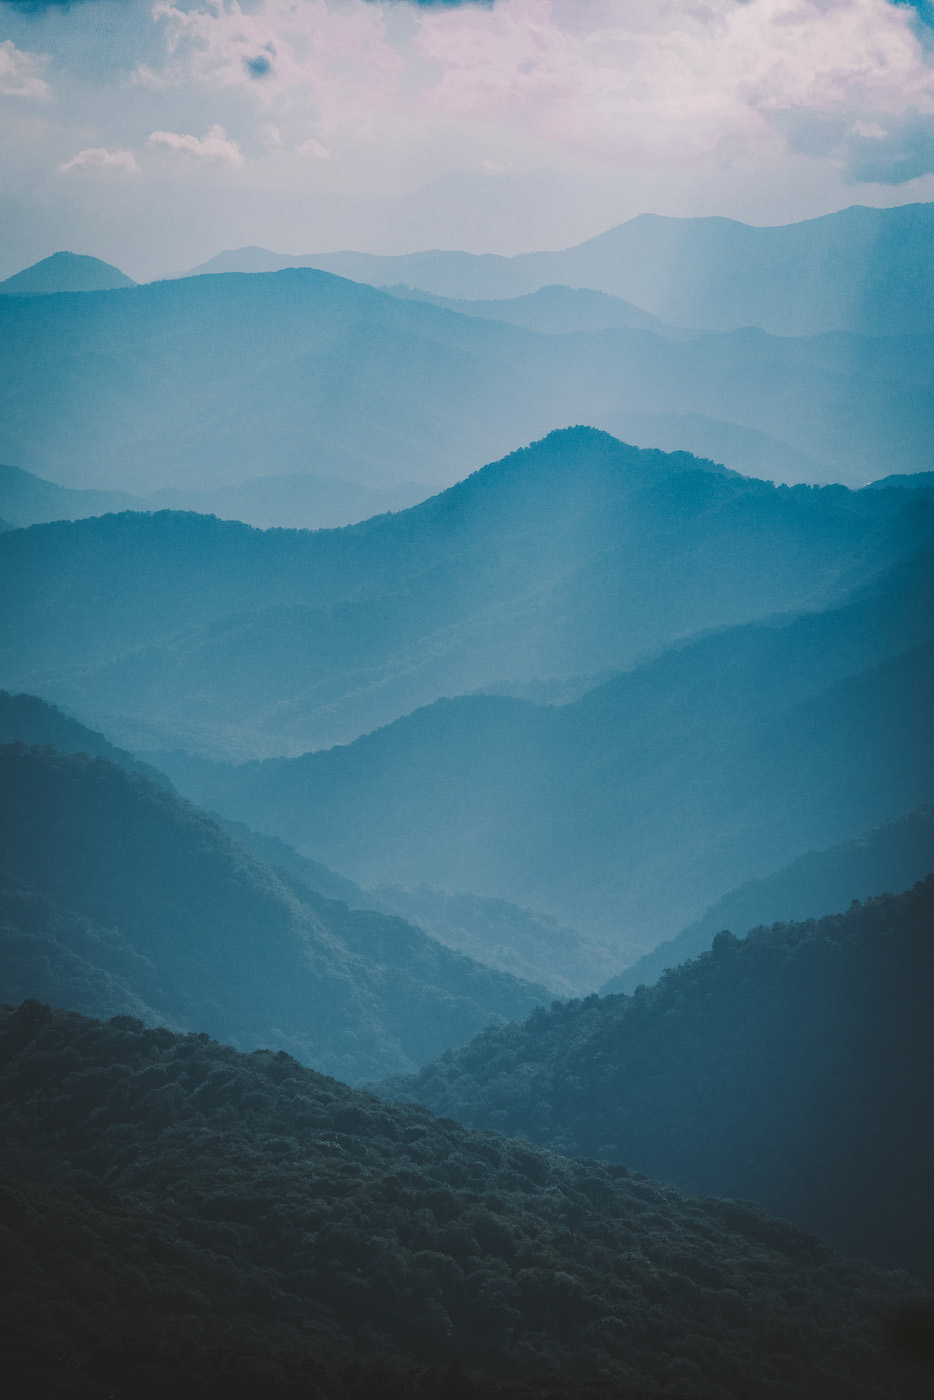 Blue Ridge layers taken by Andrew Burns - One of the best photographers in North Carolina